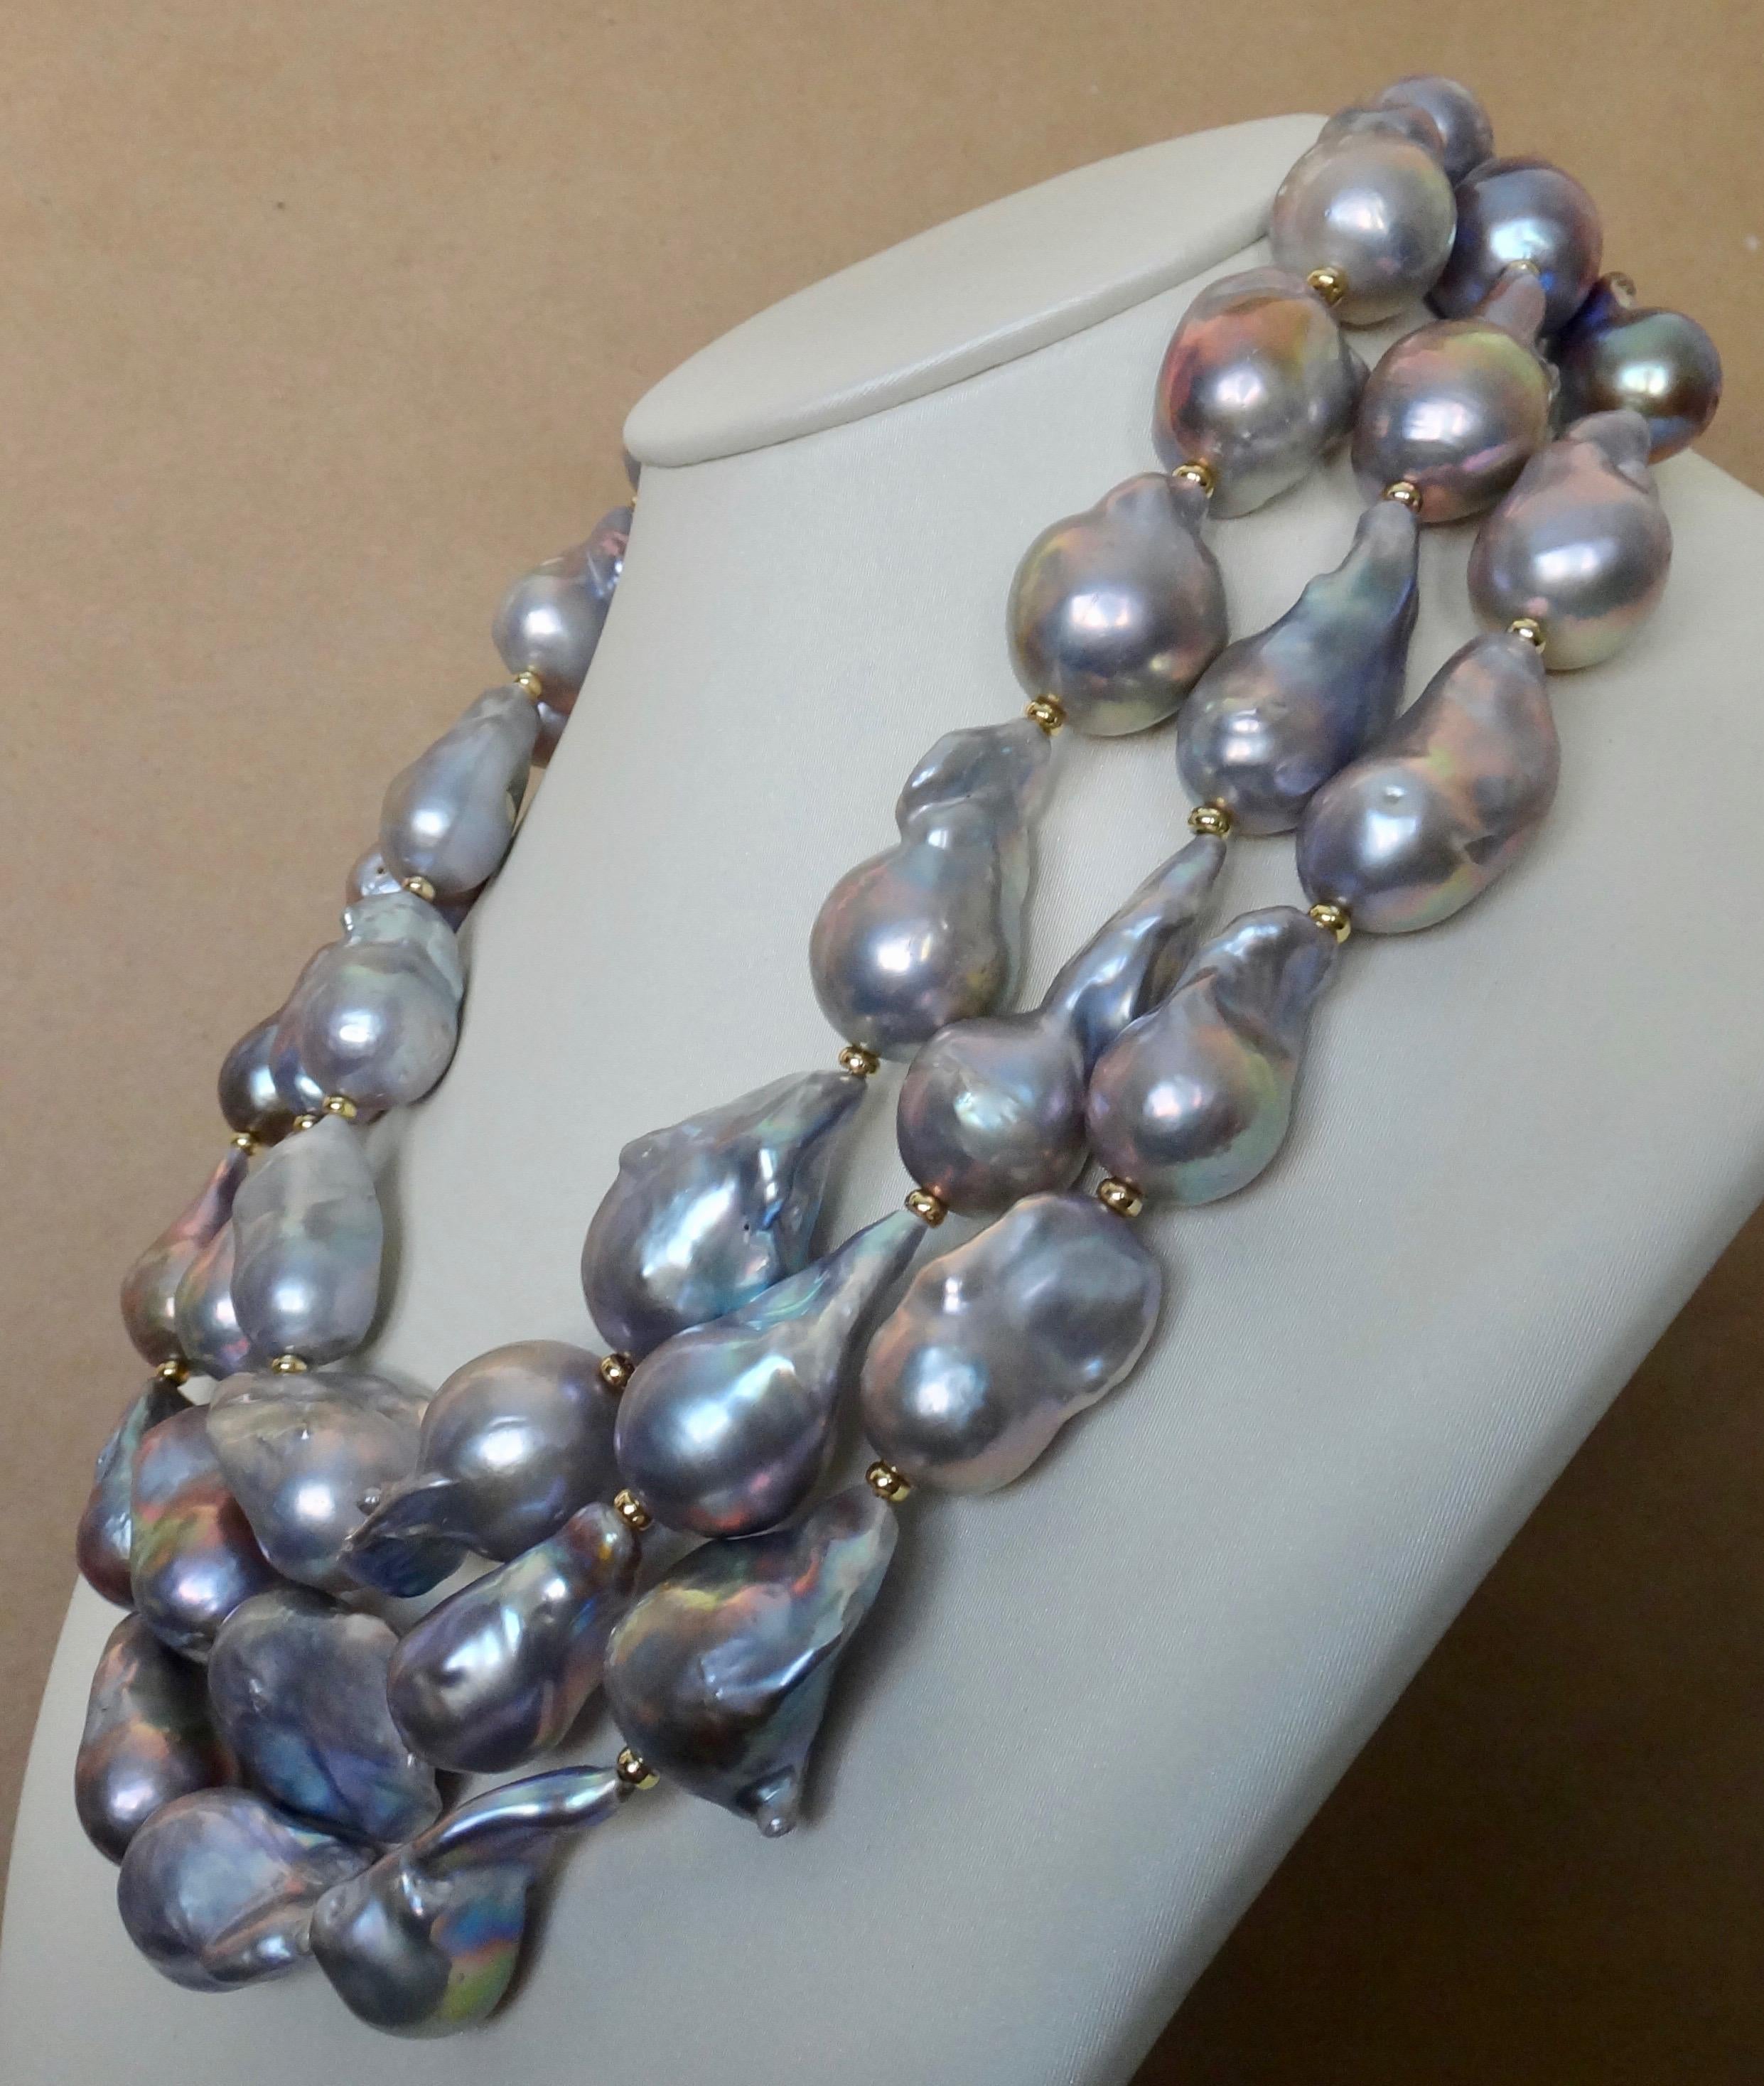  Baroque gray pearls in three graduated strands comprise this sensational necklace.  The 45 pearls range in size from 23mm to a gargantuan size of 31mm.  All the baroque pearls are highly lustrous and reflect a range of colors from shades of blues,